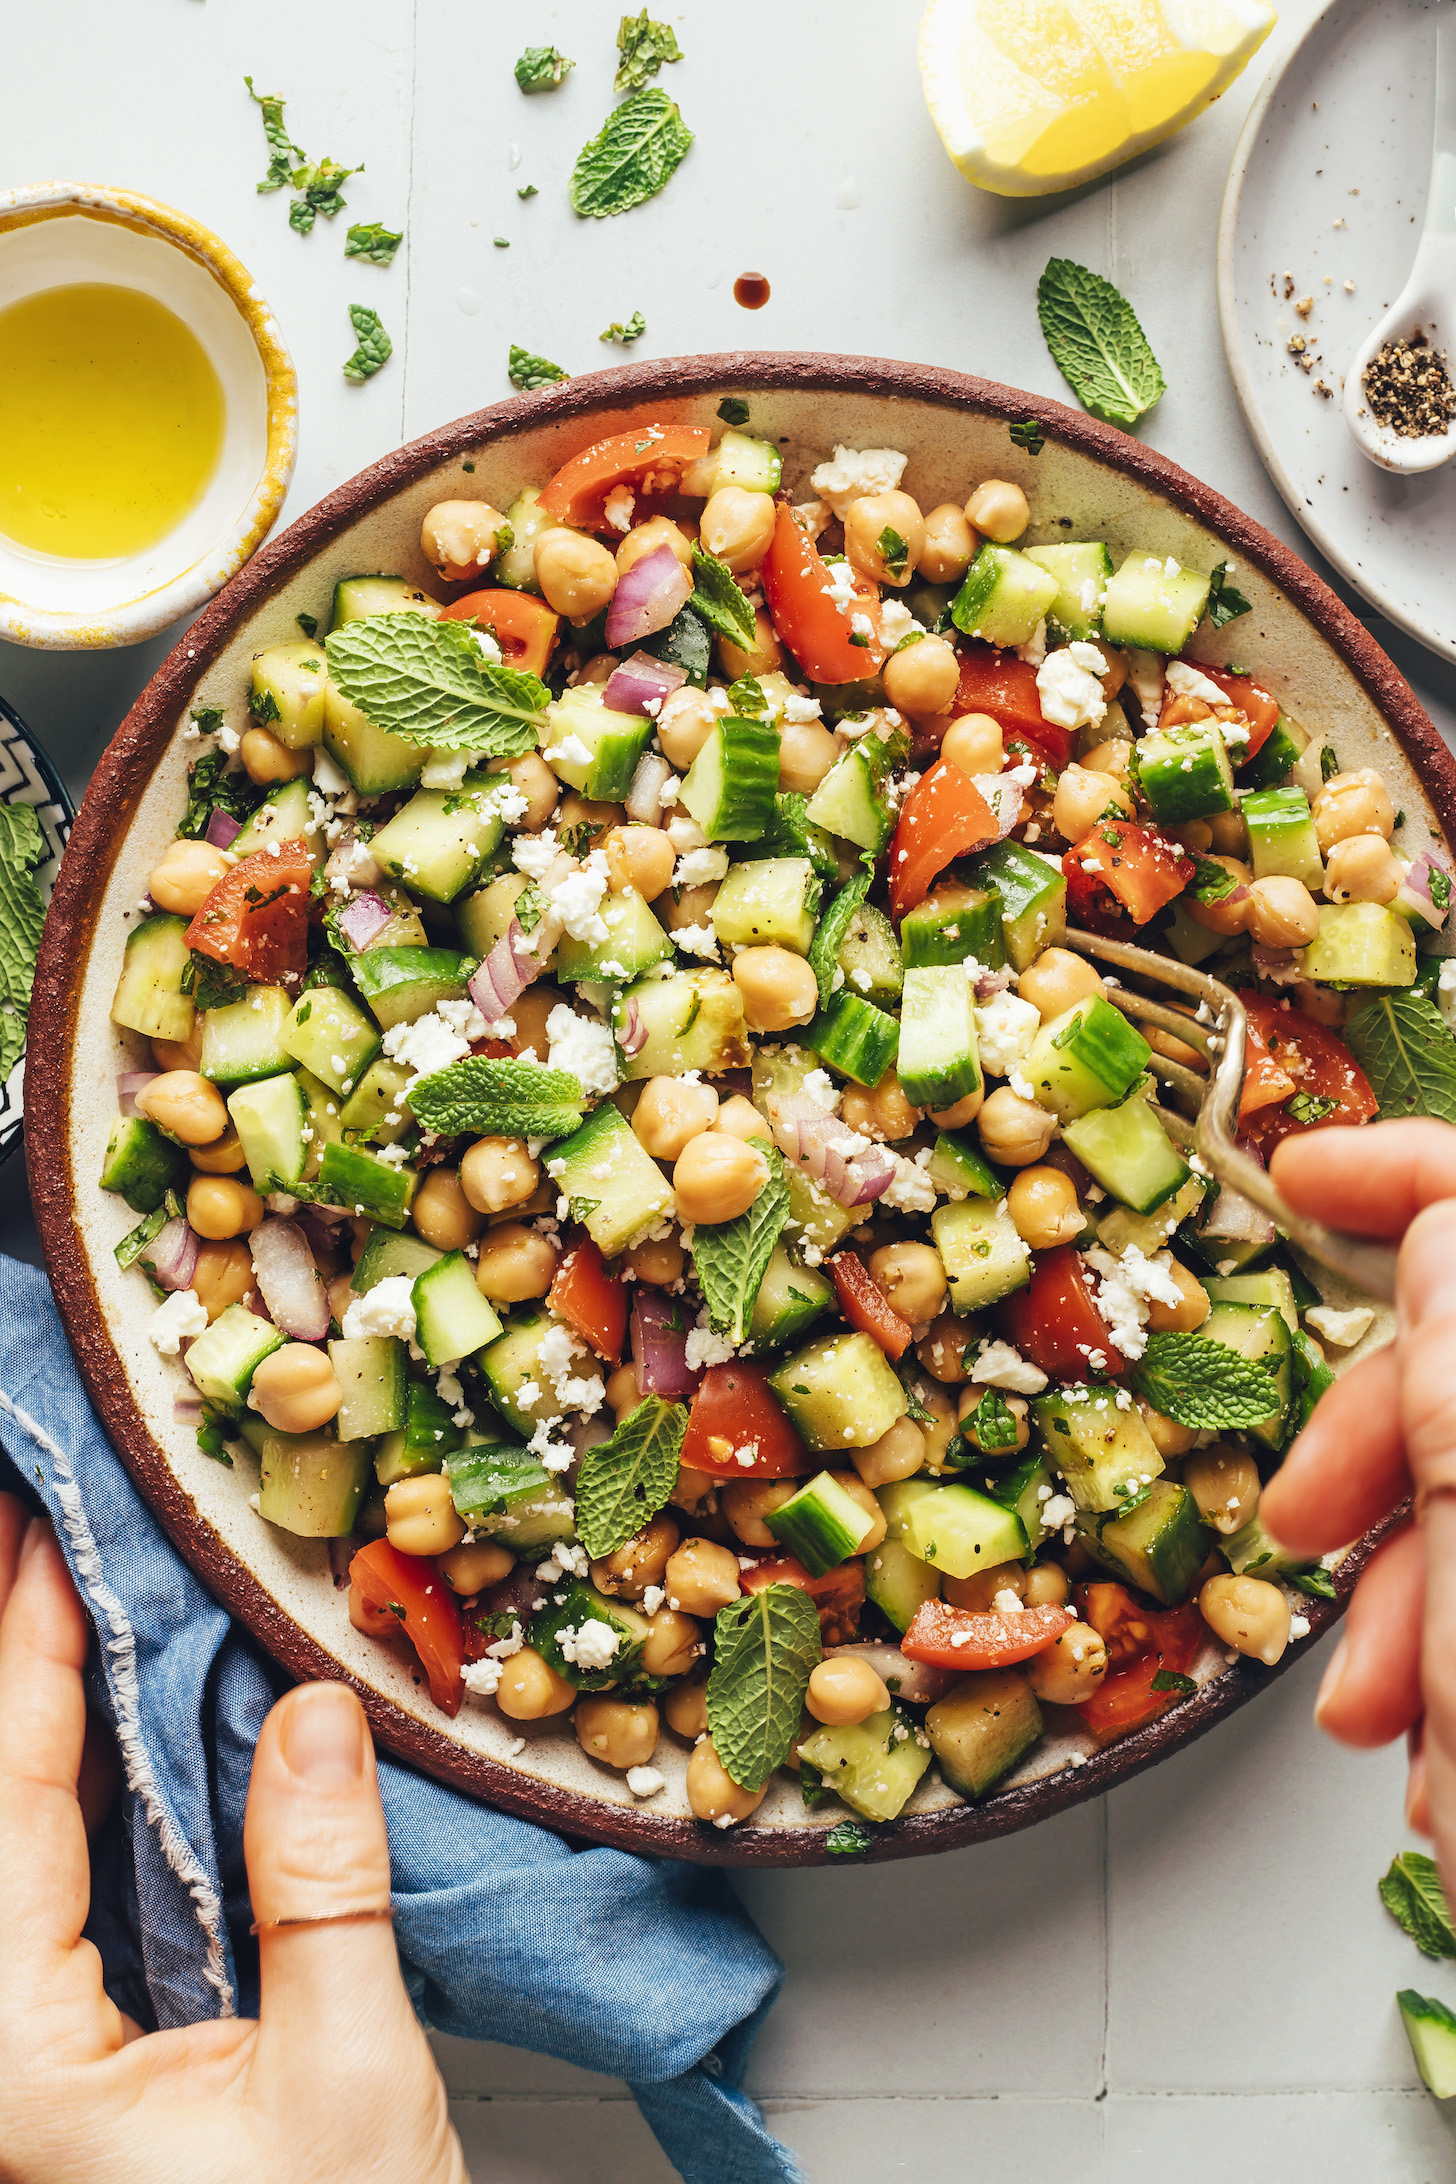 Using a fork to pick up a bite of Mediterranean cucumber chickpea salad